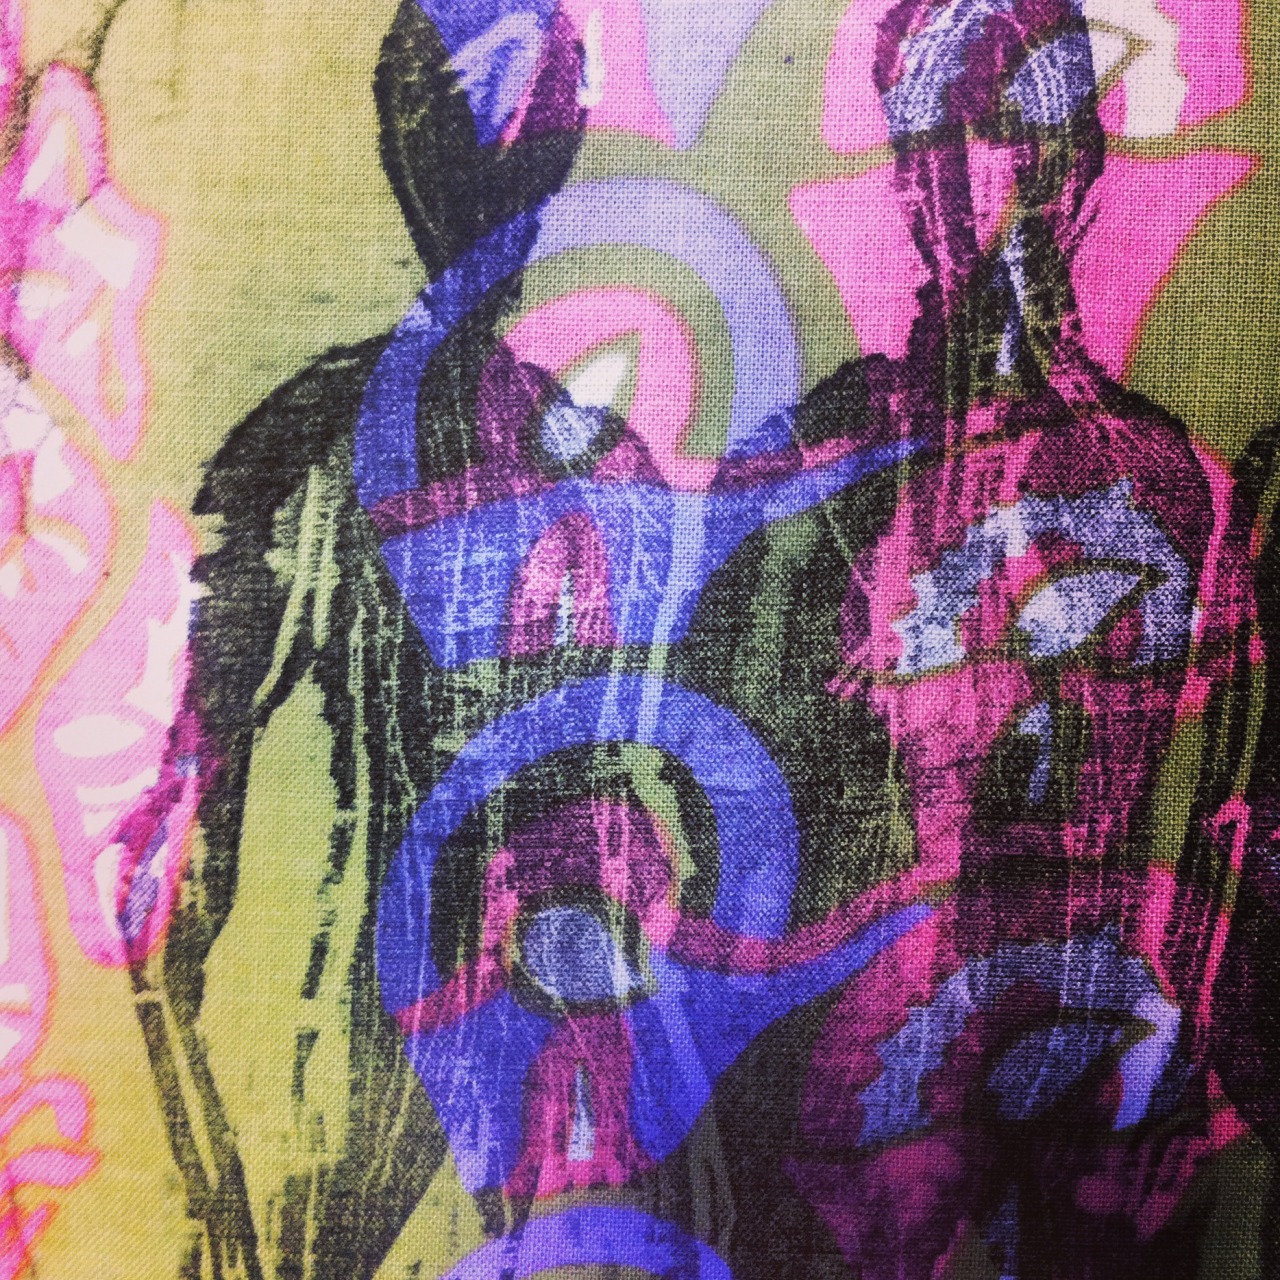 UNCLAIMED BODIES - Cover detail